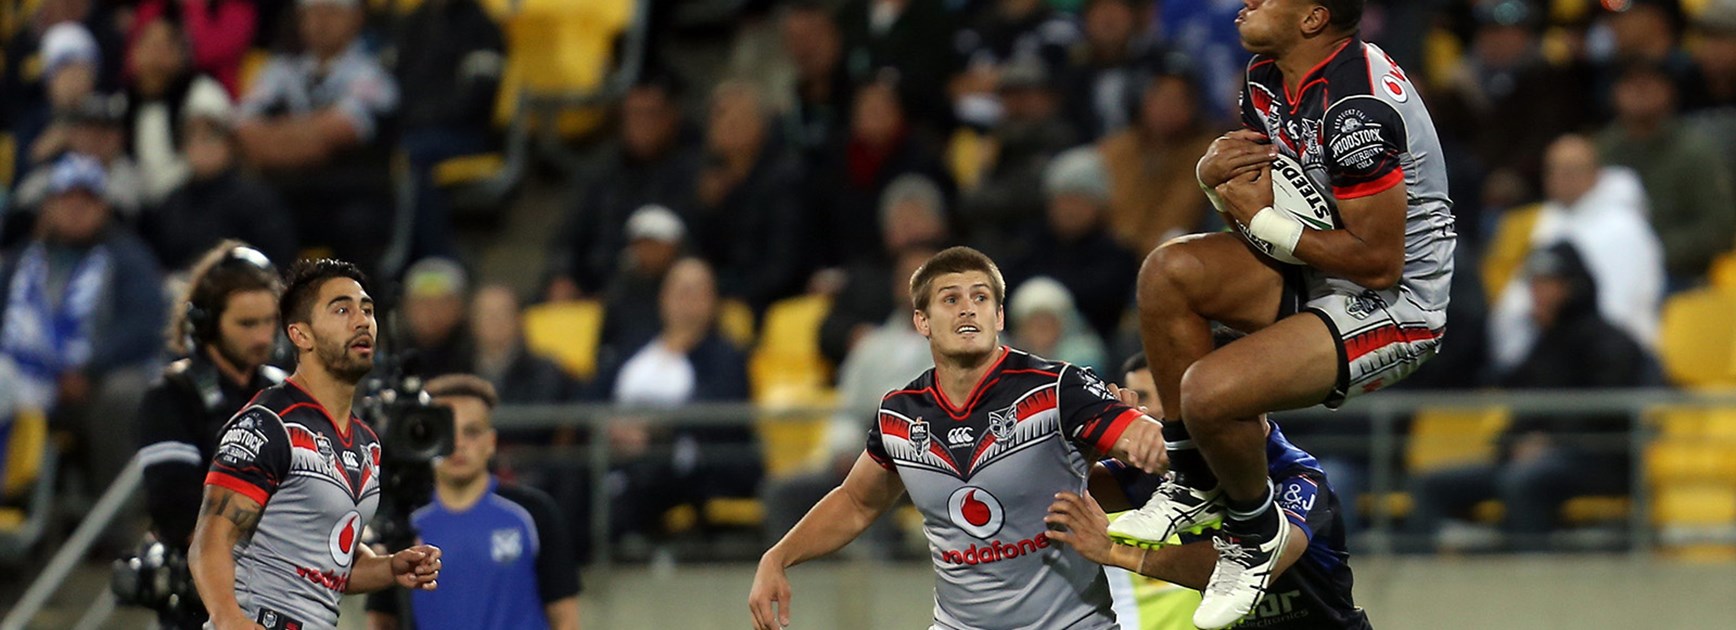 David Fusitu'a flies above the pack during the Warriors clash with the Bulldogs.